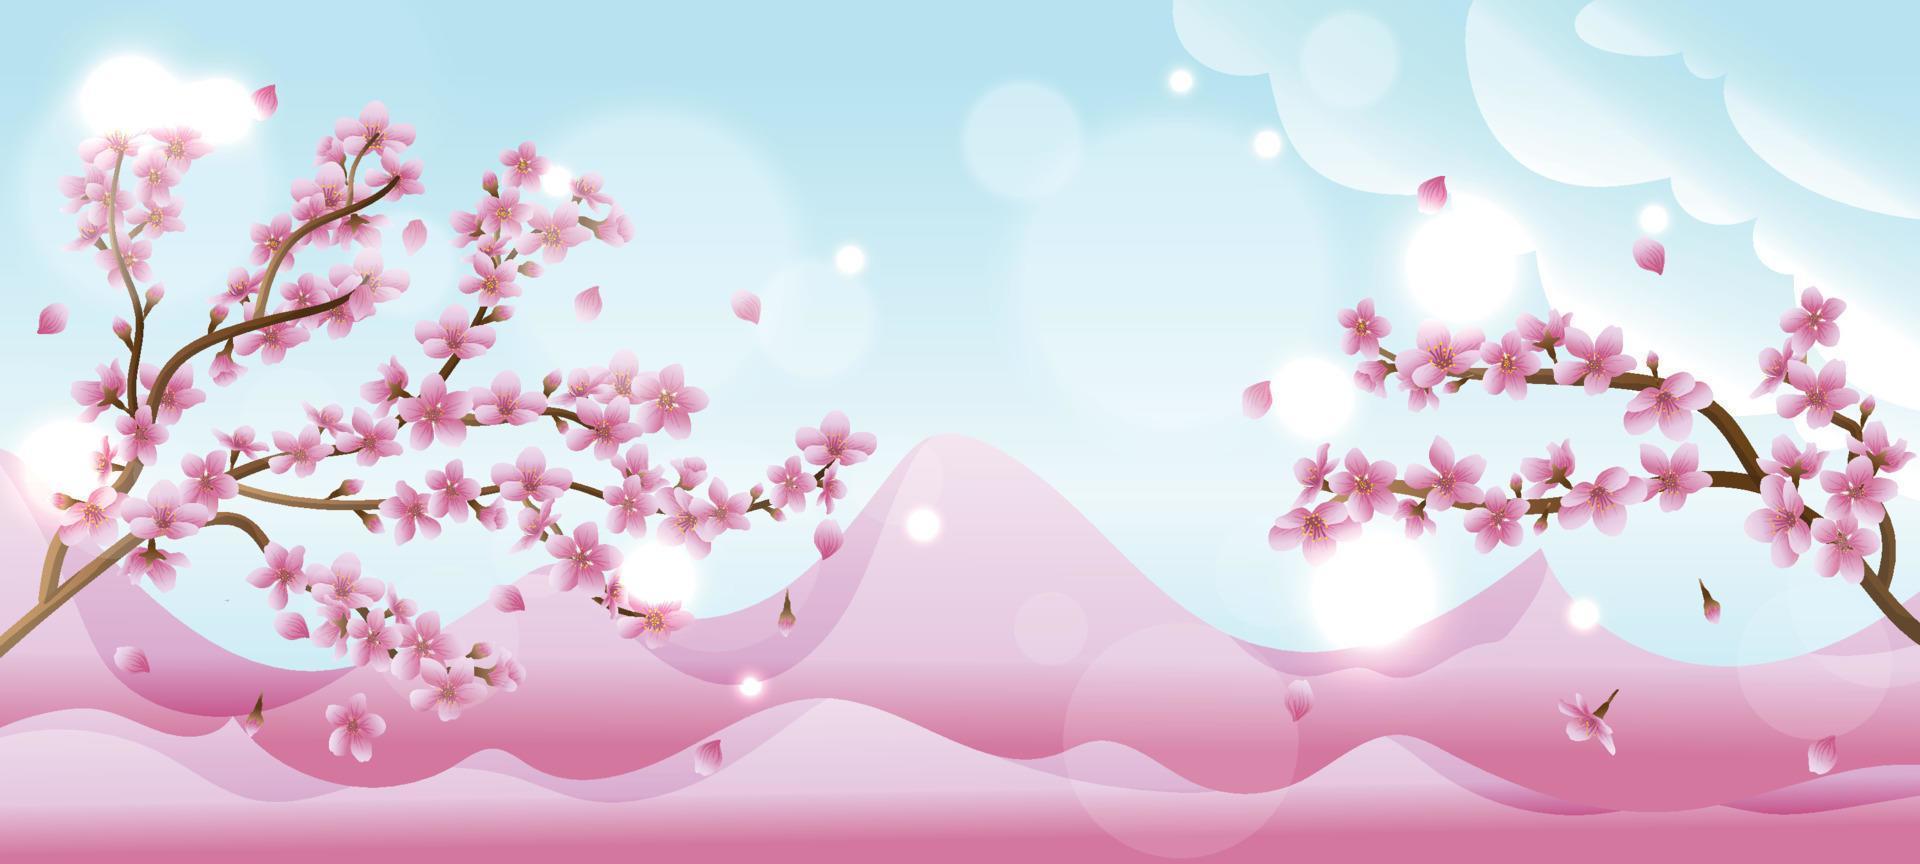 Spring Cherry Blossom Background vector